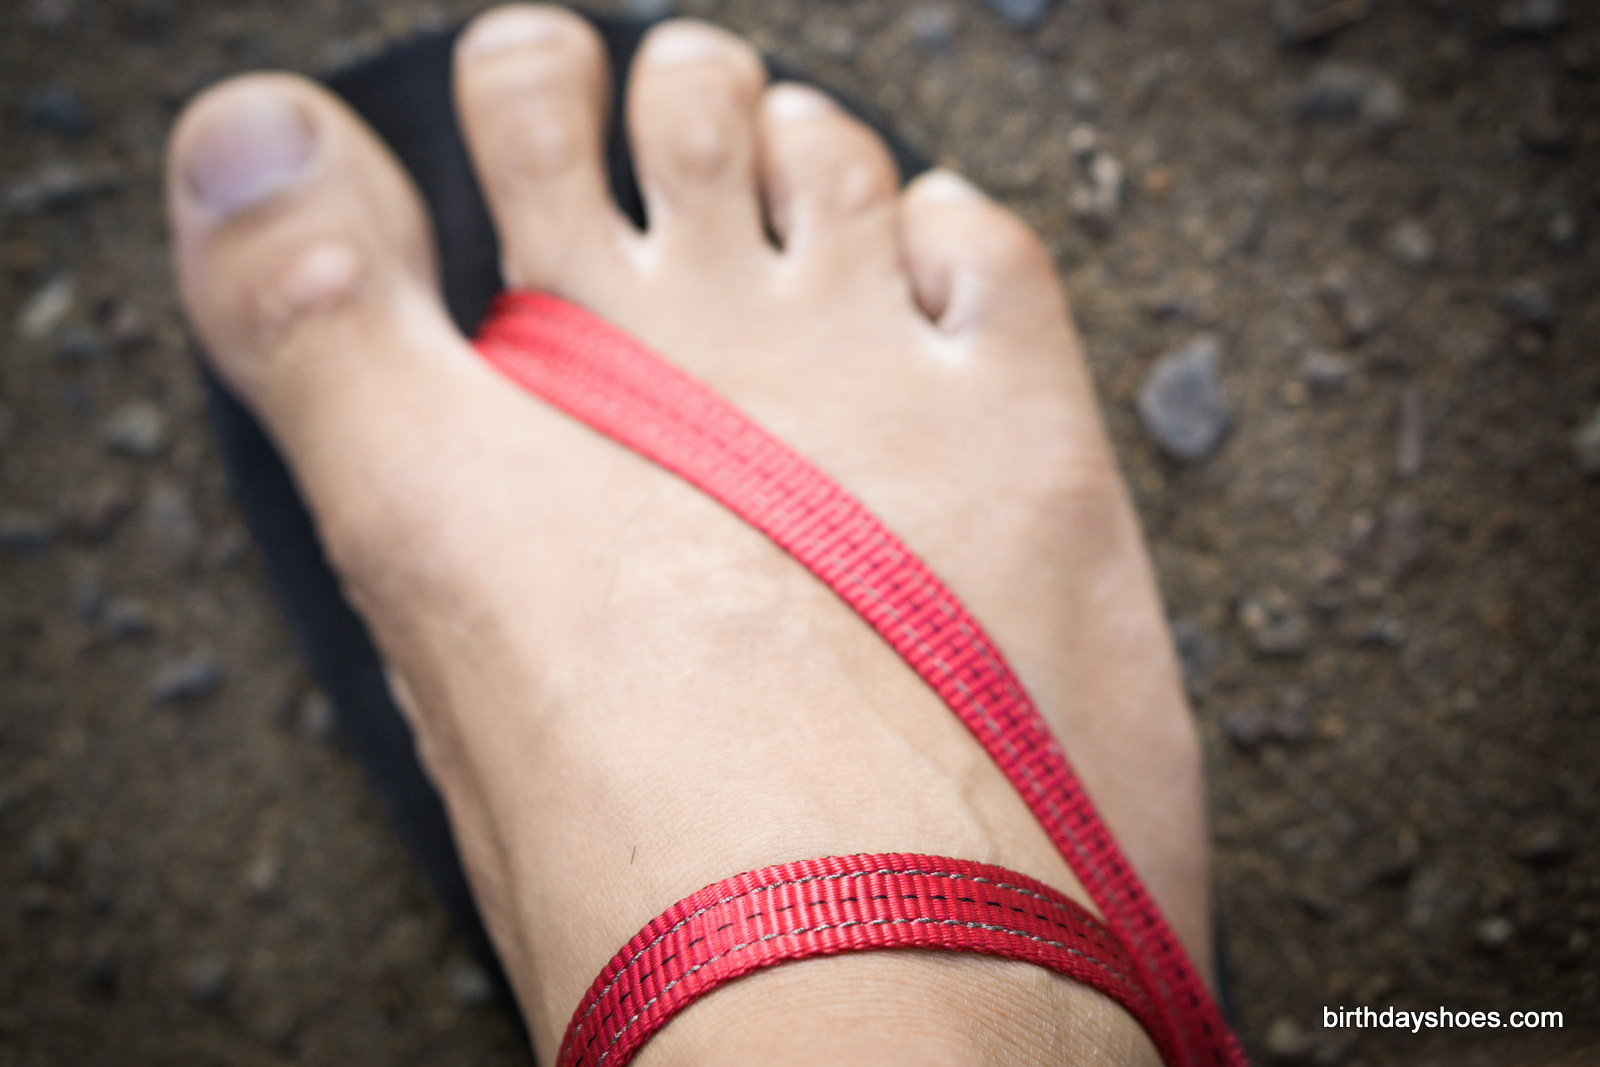 The "single-loop" strapping system of the Circadian with conductive laces has a wider arch as it wraps around the foot in two spots, giving the sandal a lot of lateral stability